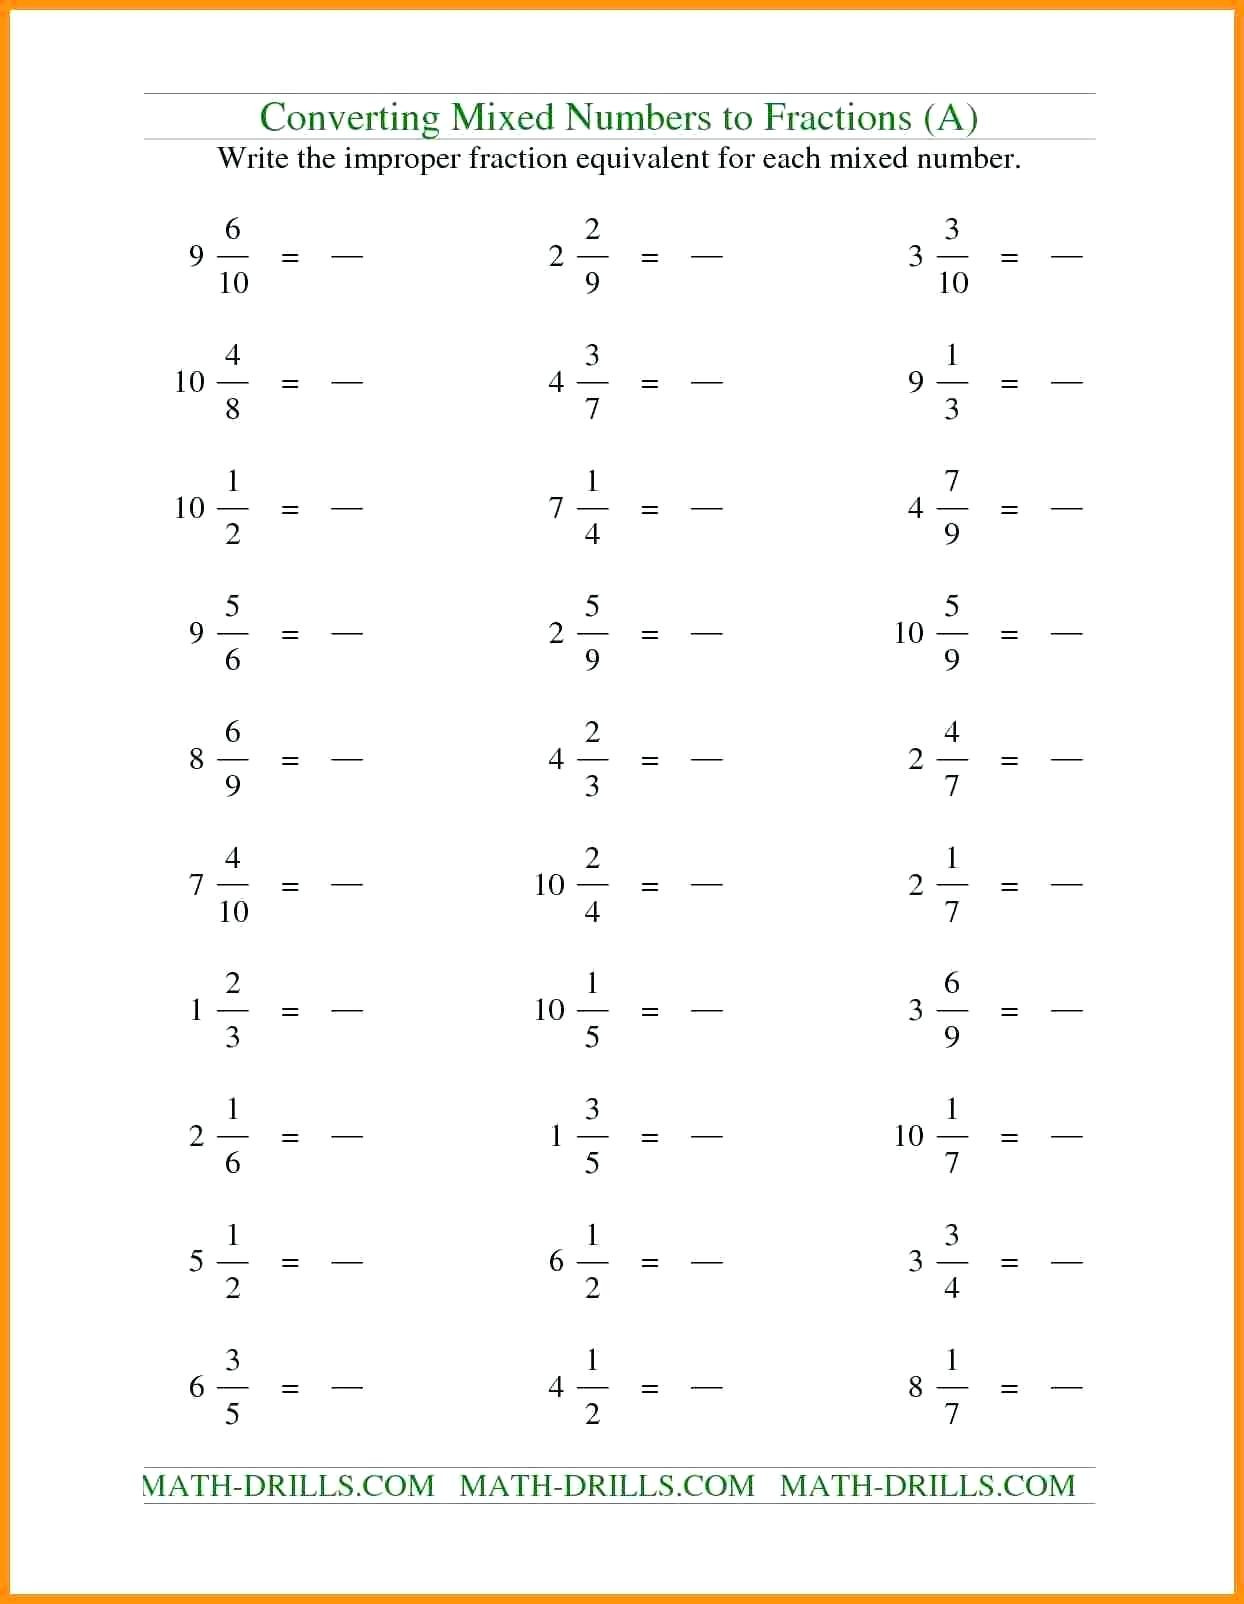 Free Math Worksheets Third Grade 3 Fractions and Decimals Comparing Fractions Improper